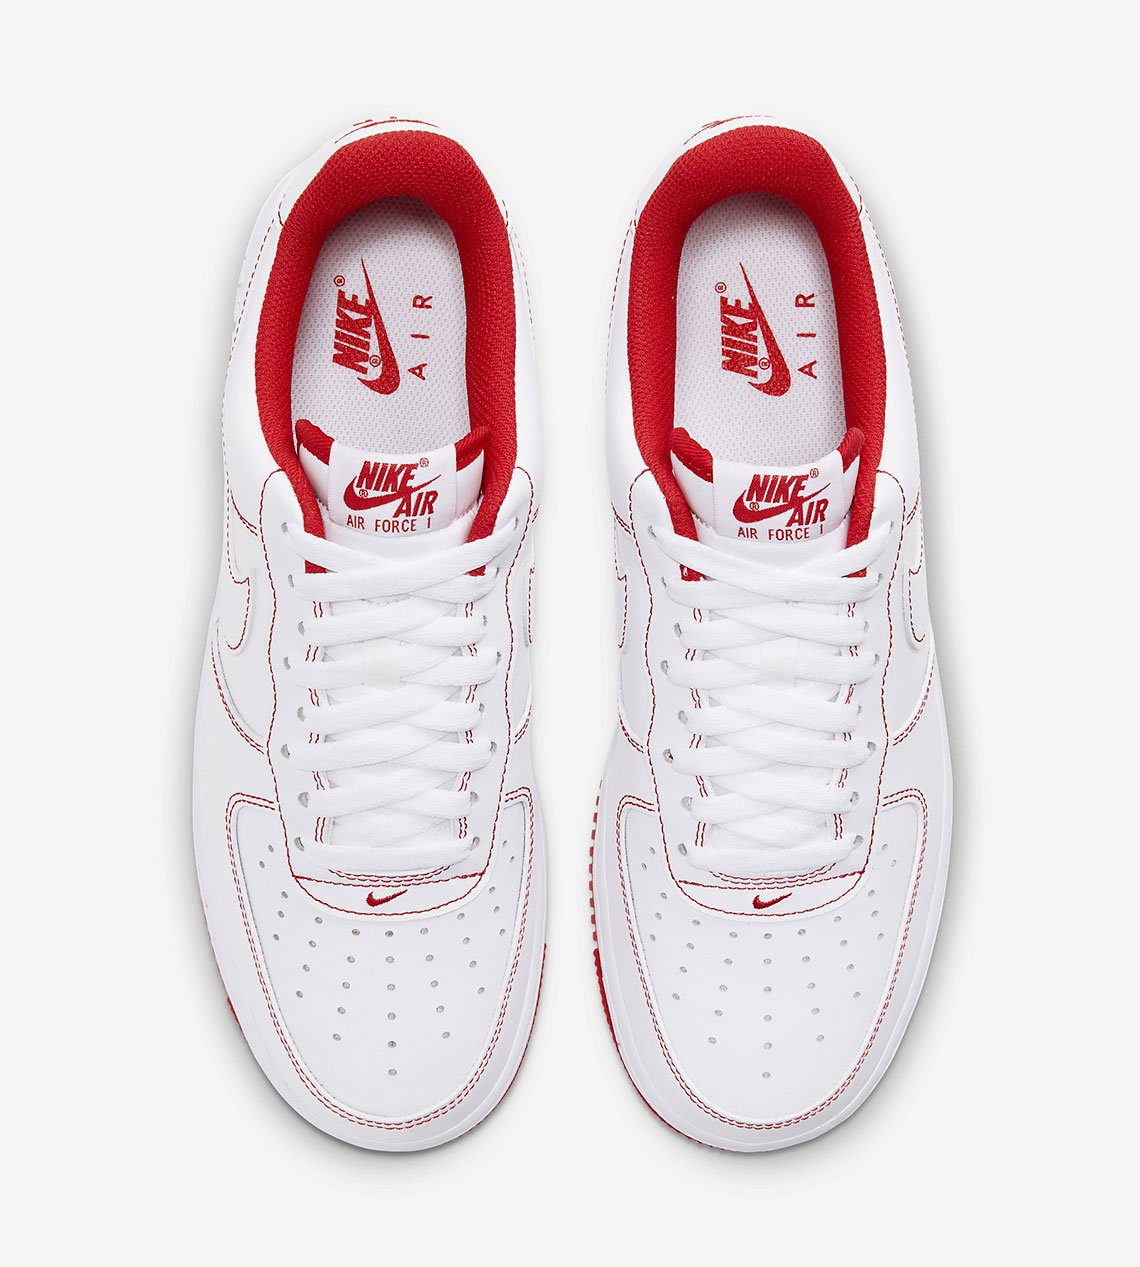 Nike Air Force 1 Low White University Red Cv1724 100 7